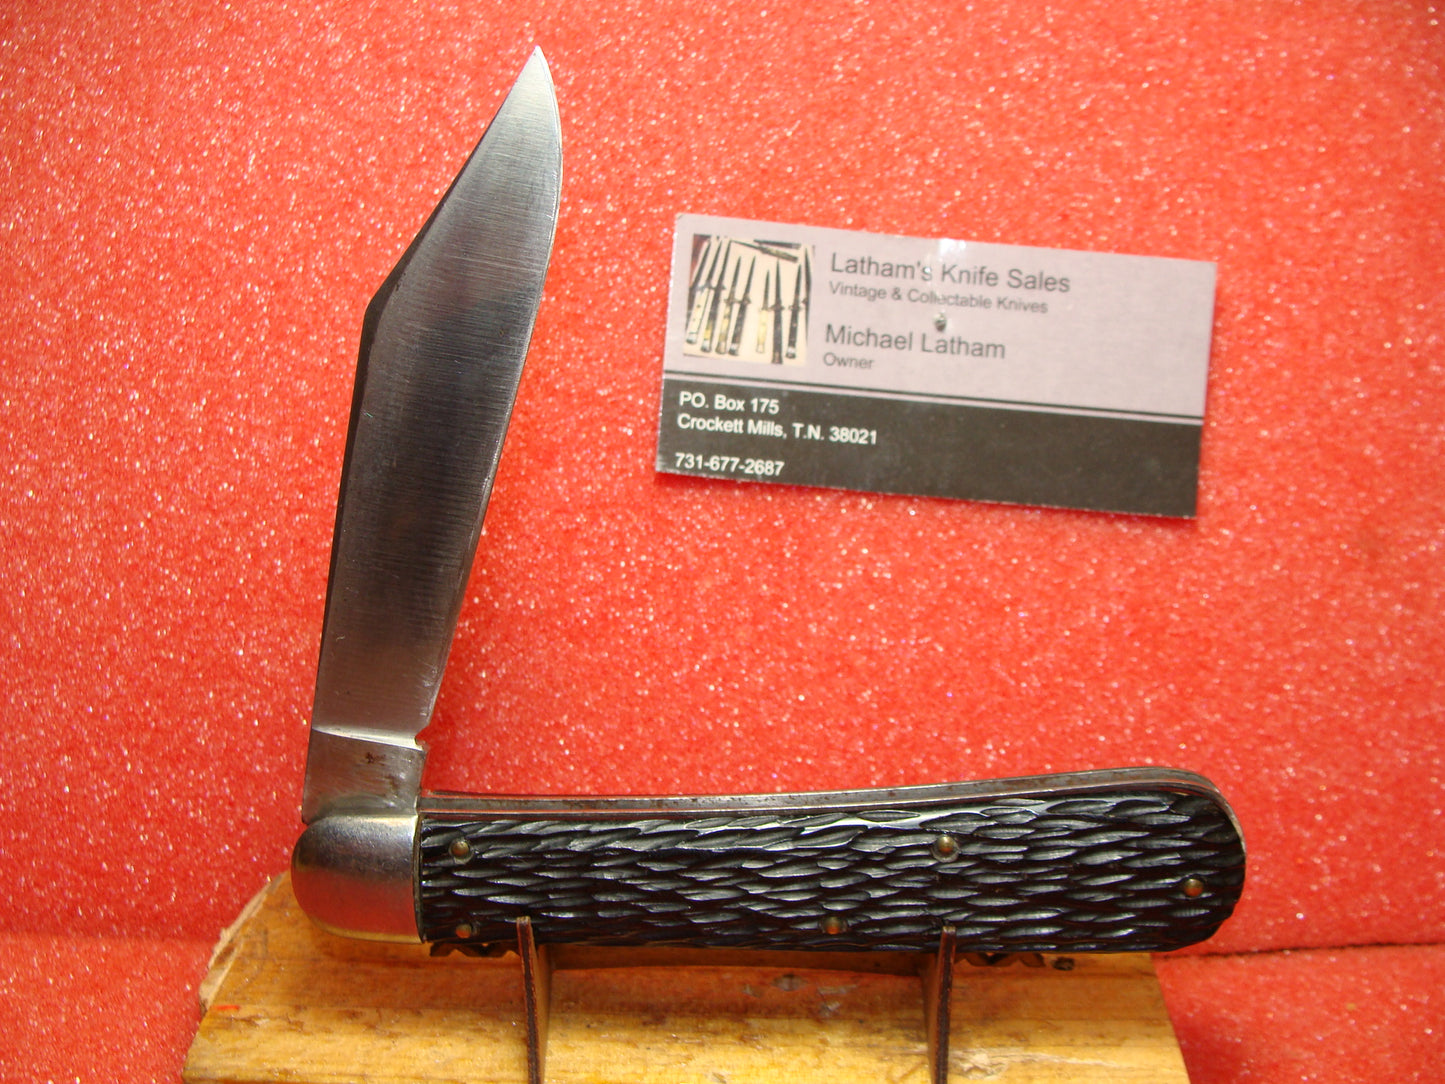 SCHRADE WALDEN NY USA 1950-56 OVB ETCH 4 7/8" VINTAGE AMERICAN AUTOMATIC KNIFE BLACK JIGGED COMPOSITION HANDLES